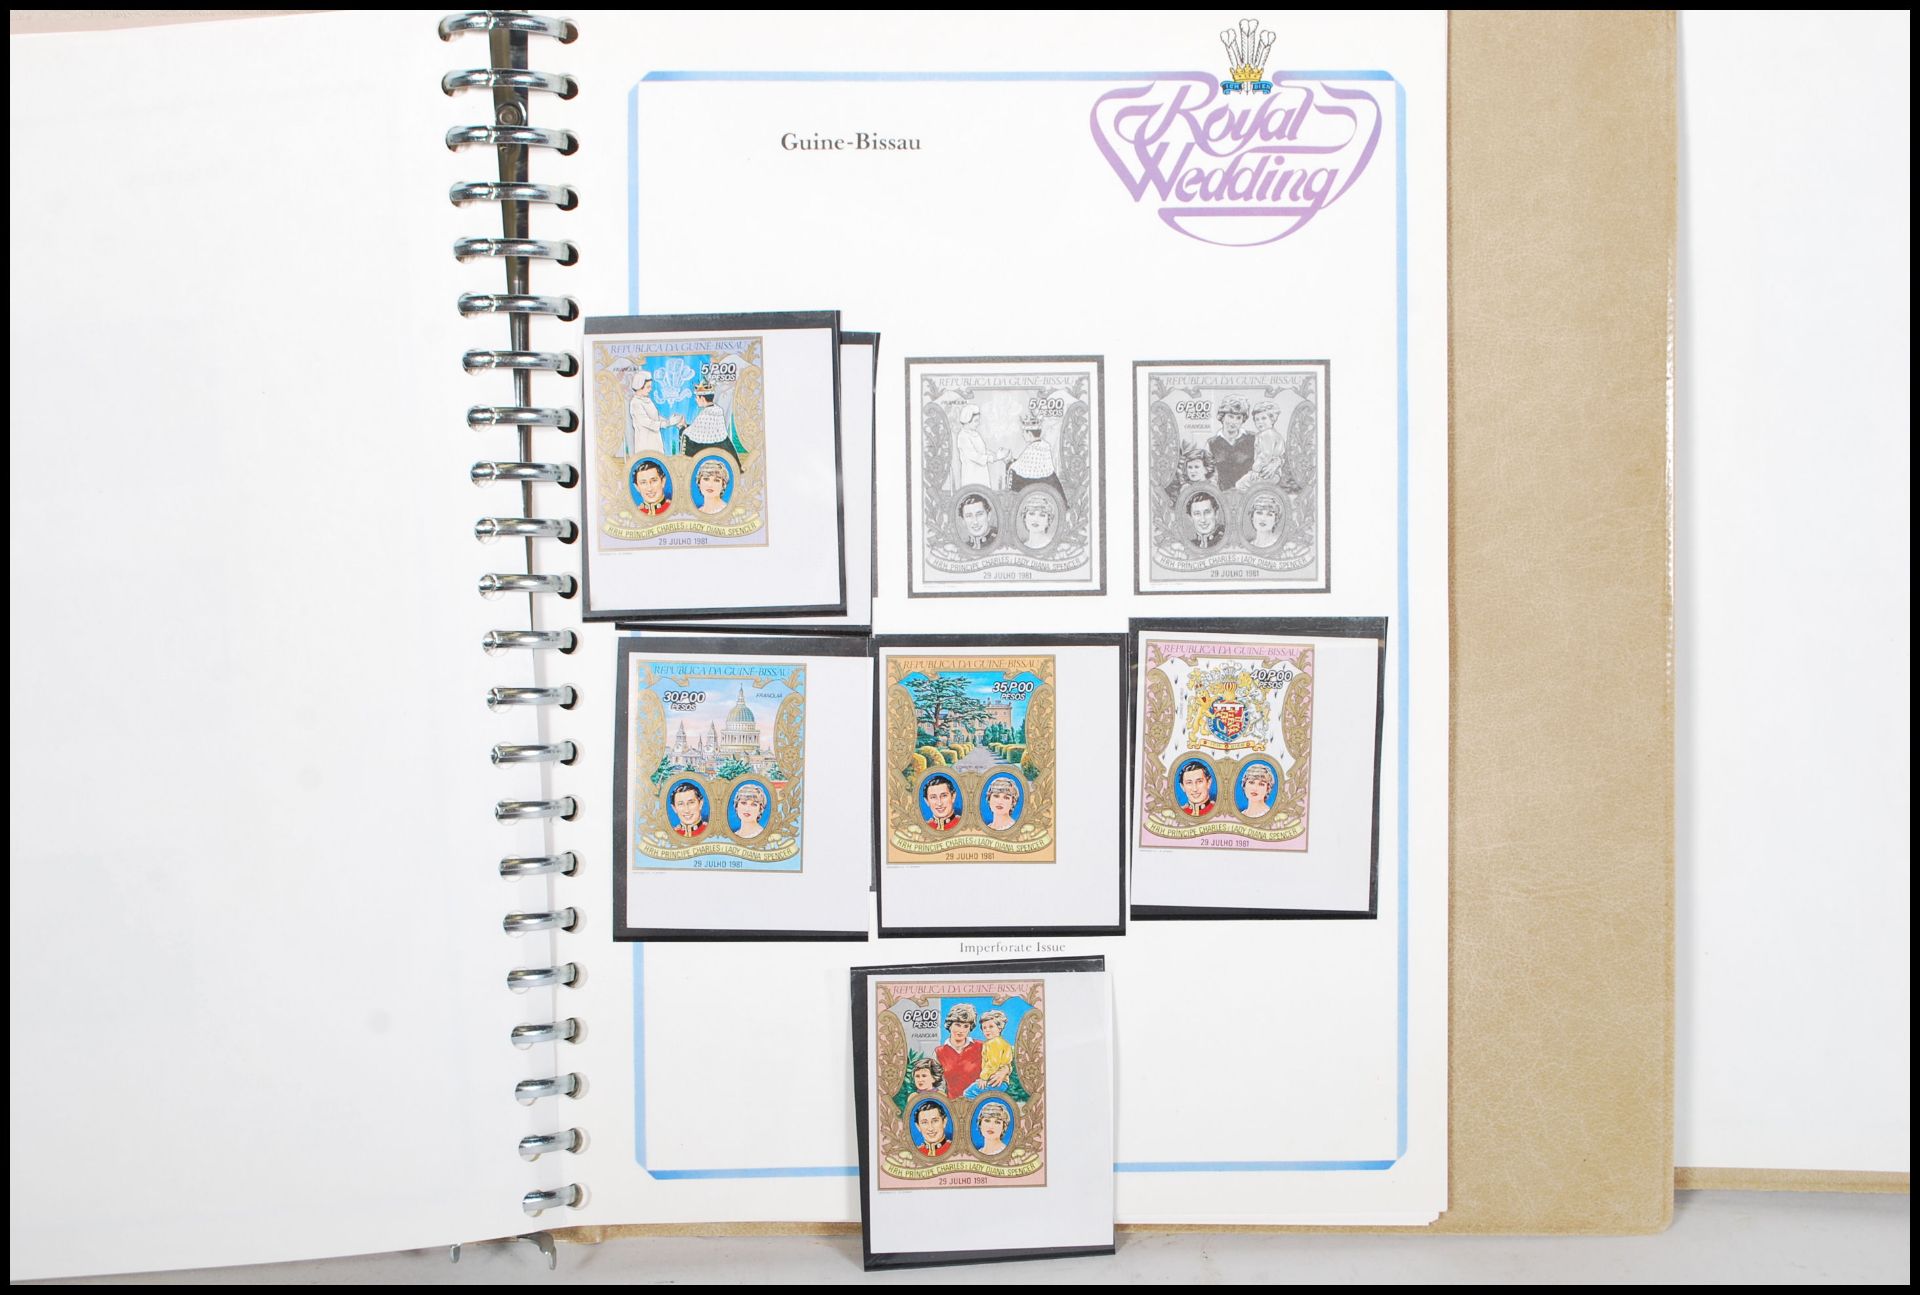 Two albums of commemorative Royal Wedding Lady Diana Spencer and the Prince of Wales post decimal - Image 4 of 12